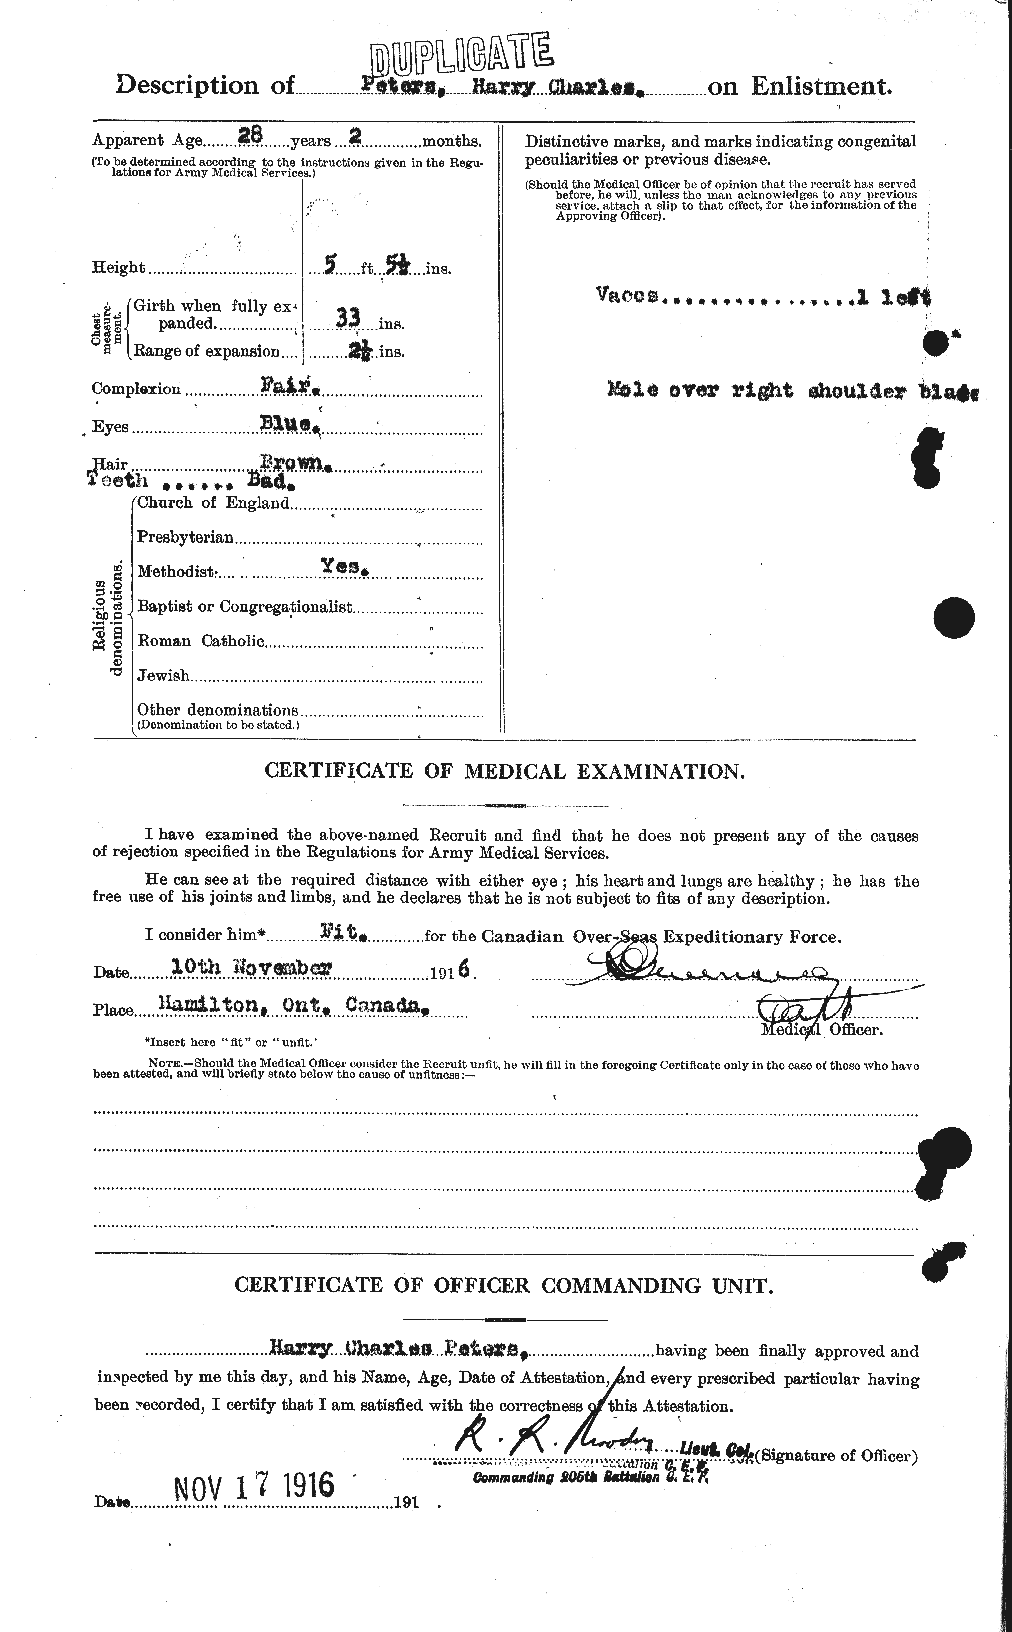 Personnel Records of the First World War - CEF 575478b